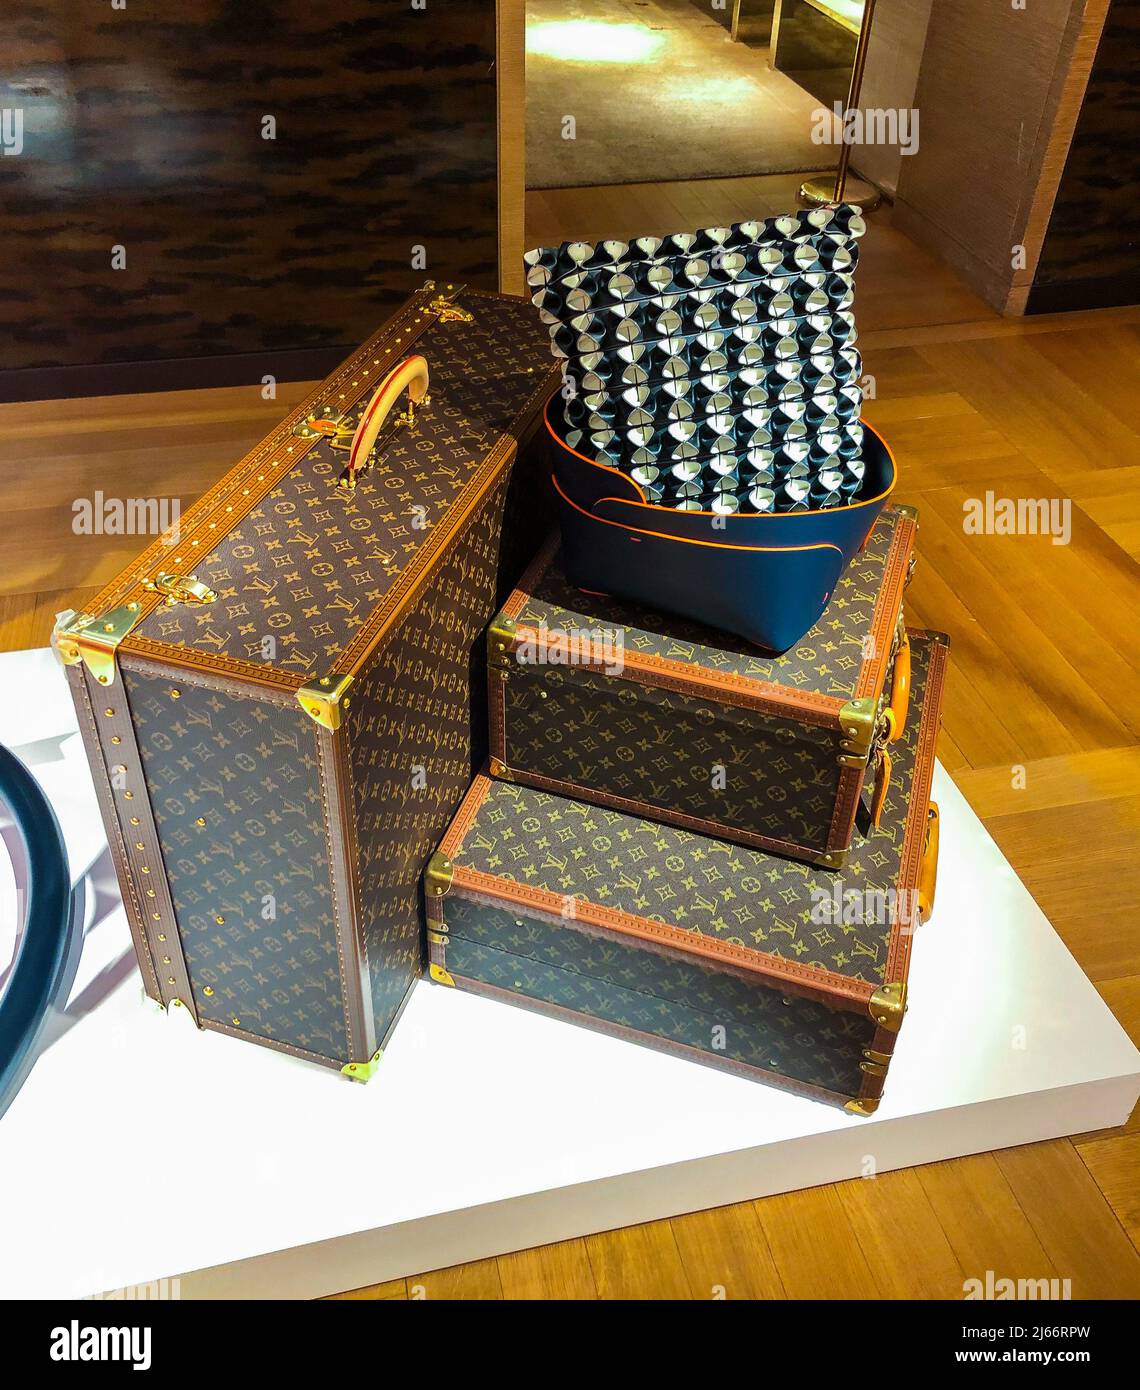 Paris, France, Louis Vuitton Luggage on Display in LVMH Store